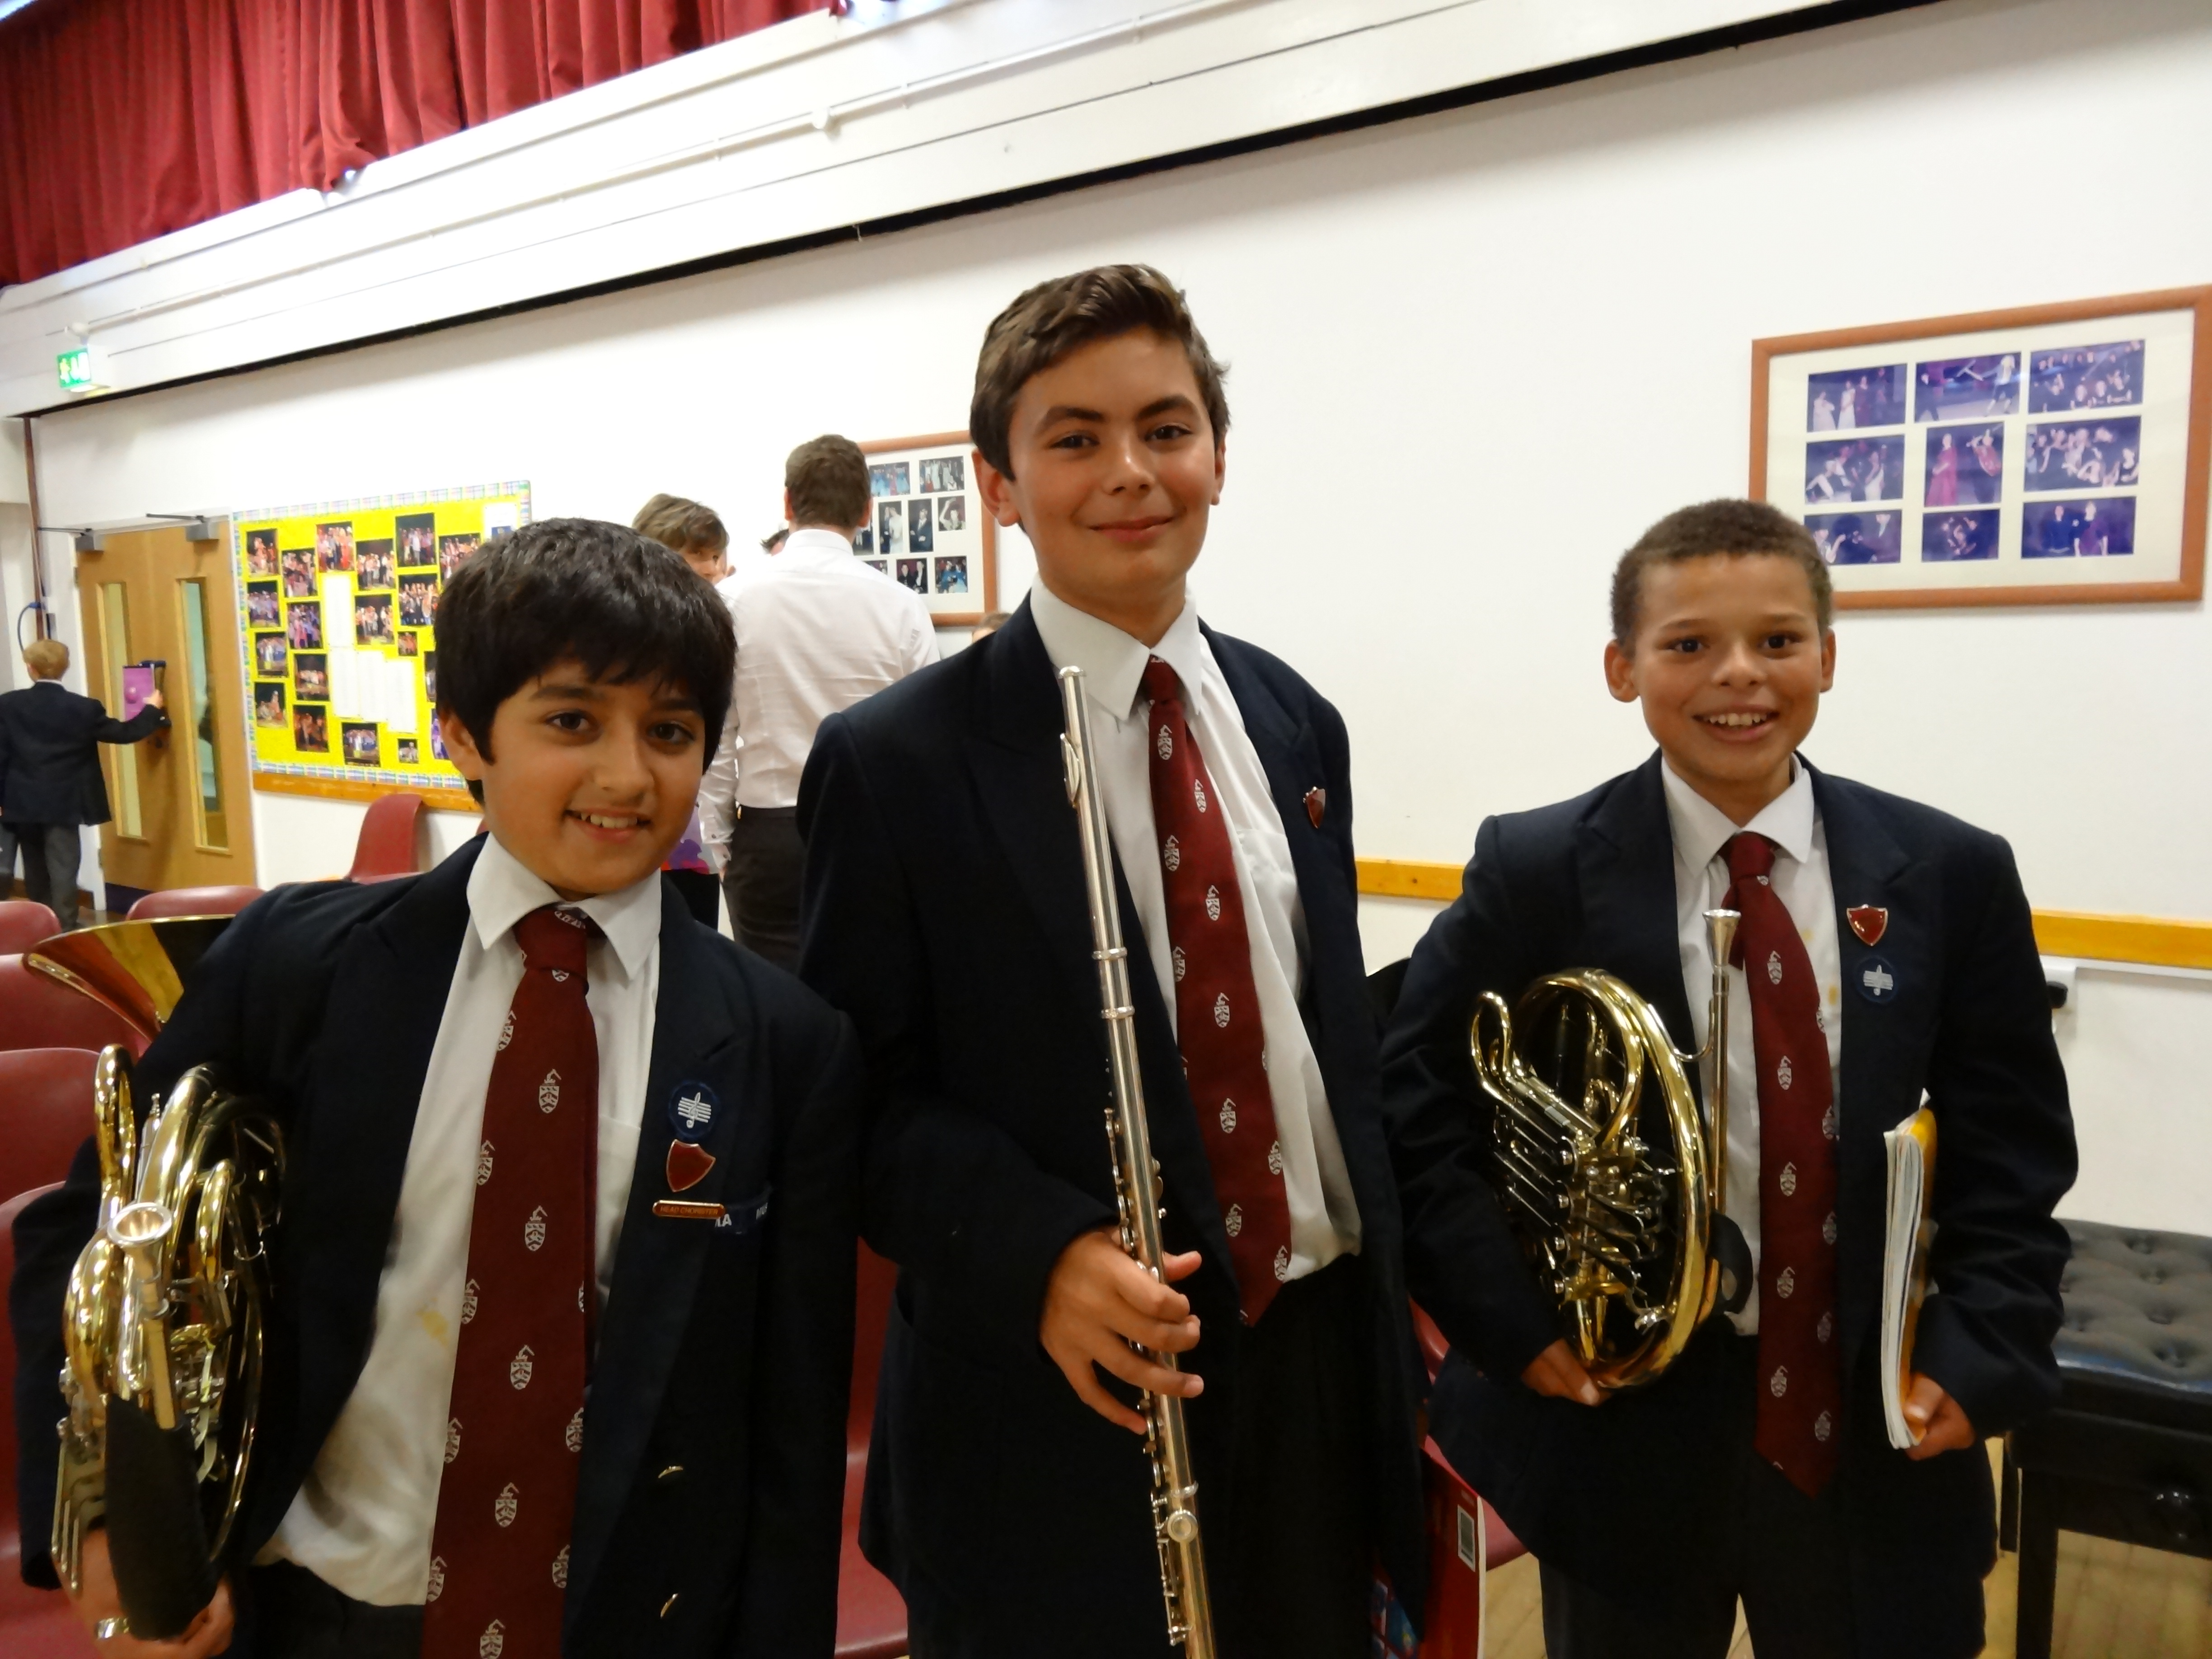 October 2014 - Years 6, 7 and 8 Lunchtime Concert